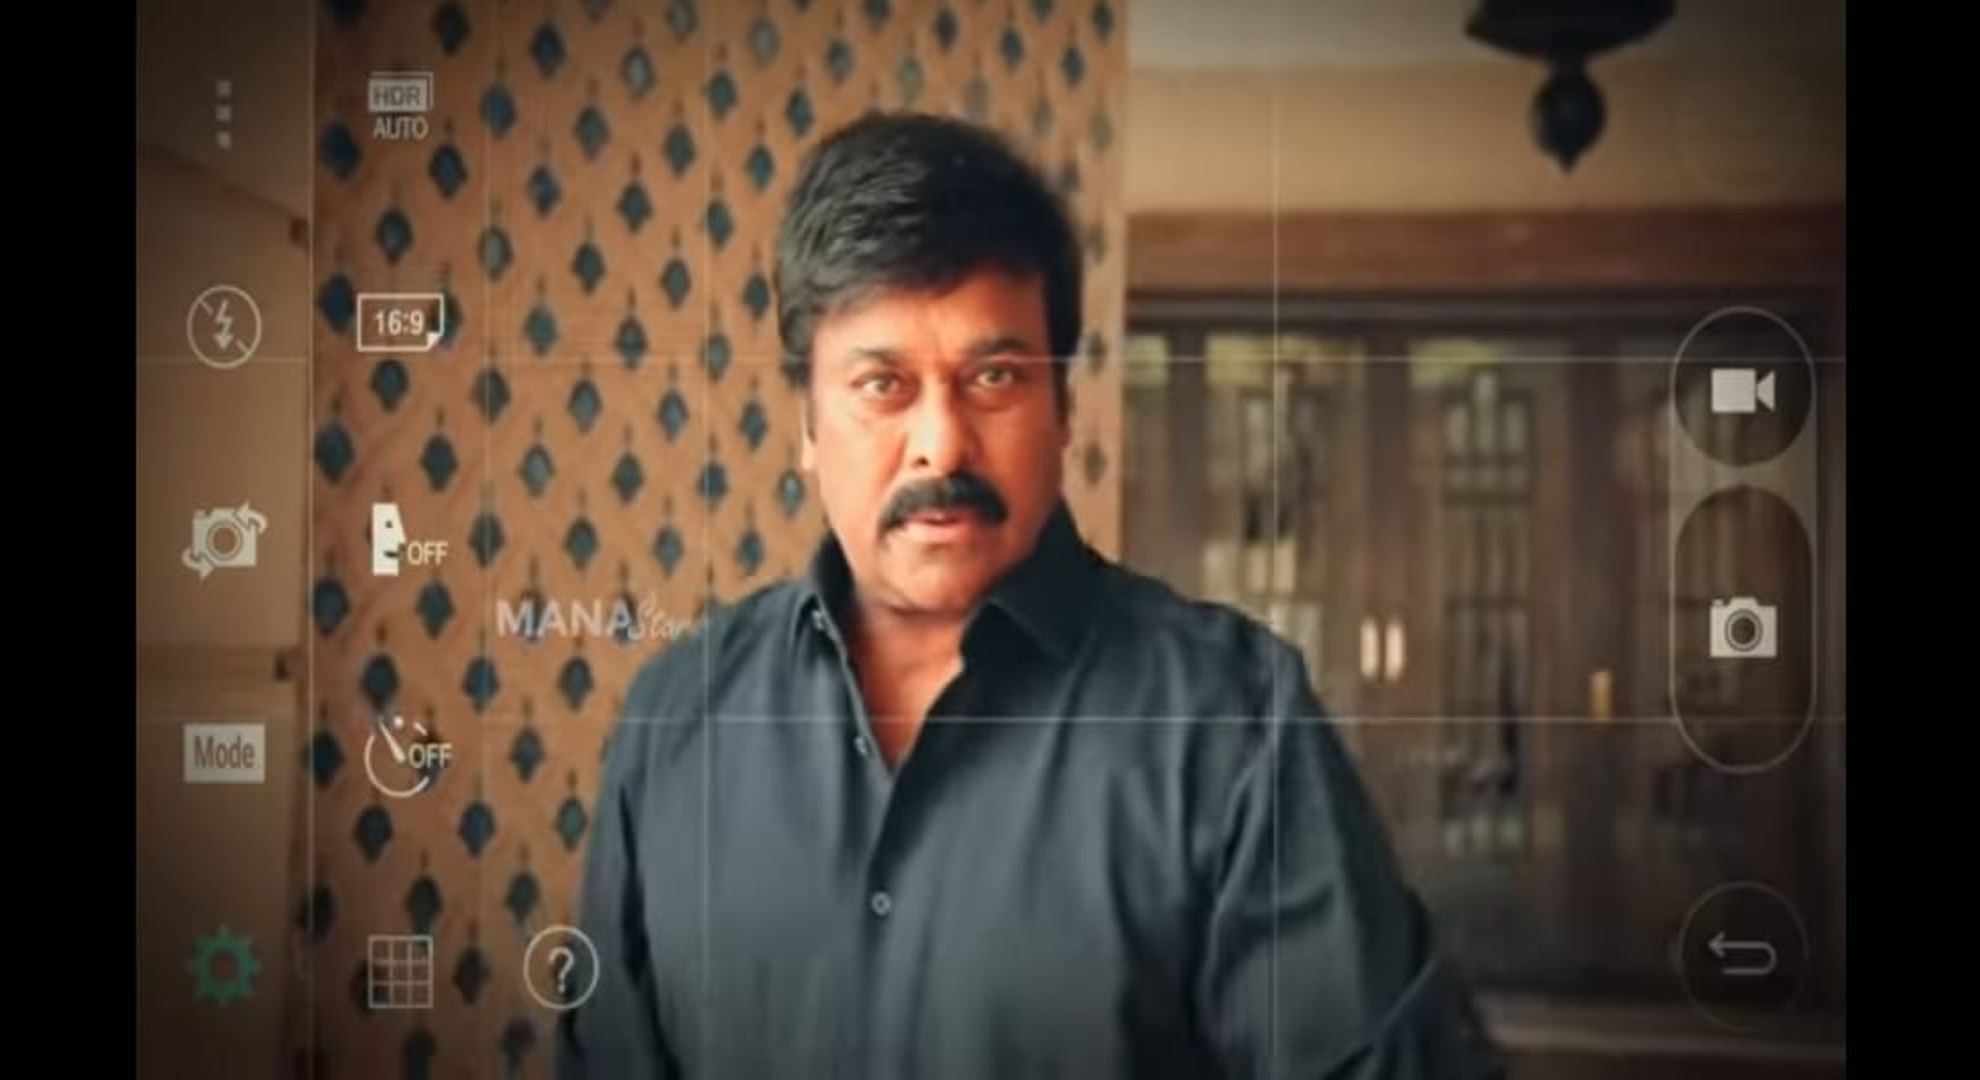 Megastar Chiranjeevi requests people to stay at home with a musical video campaign